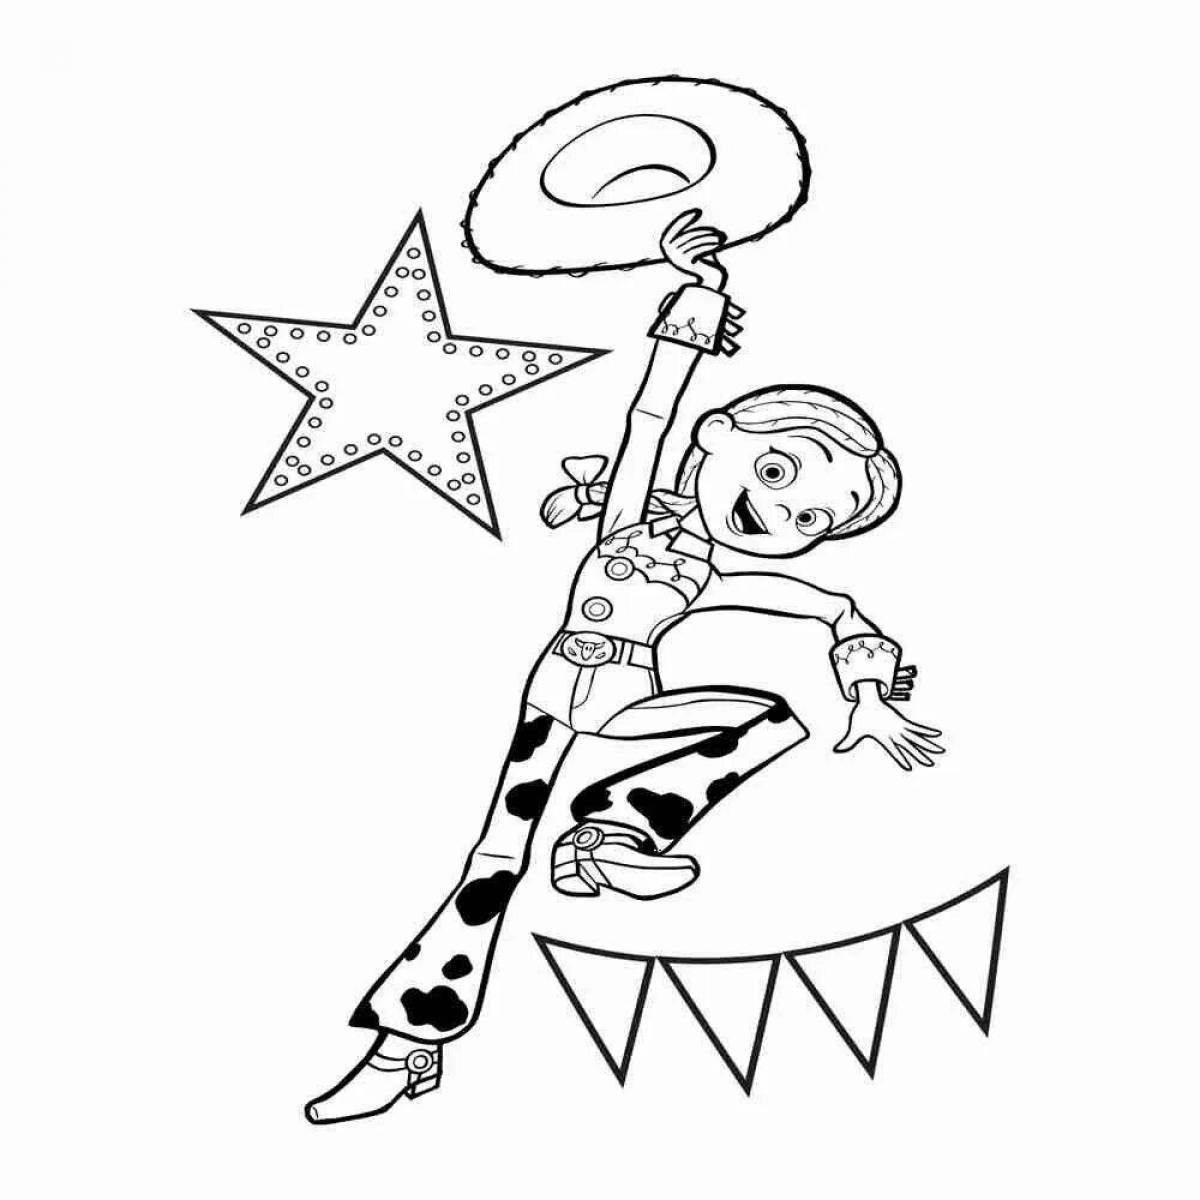 Jessie's Incredible Toy Story Coloring Page